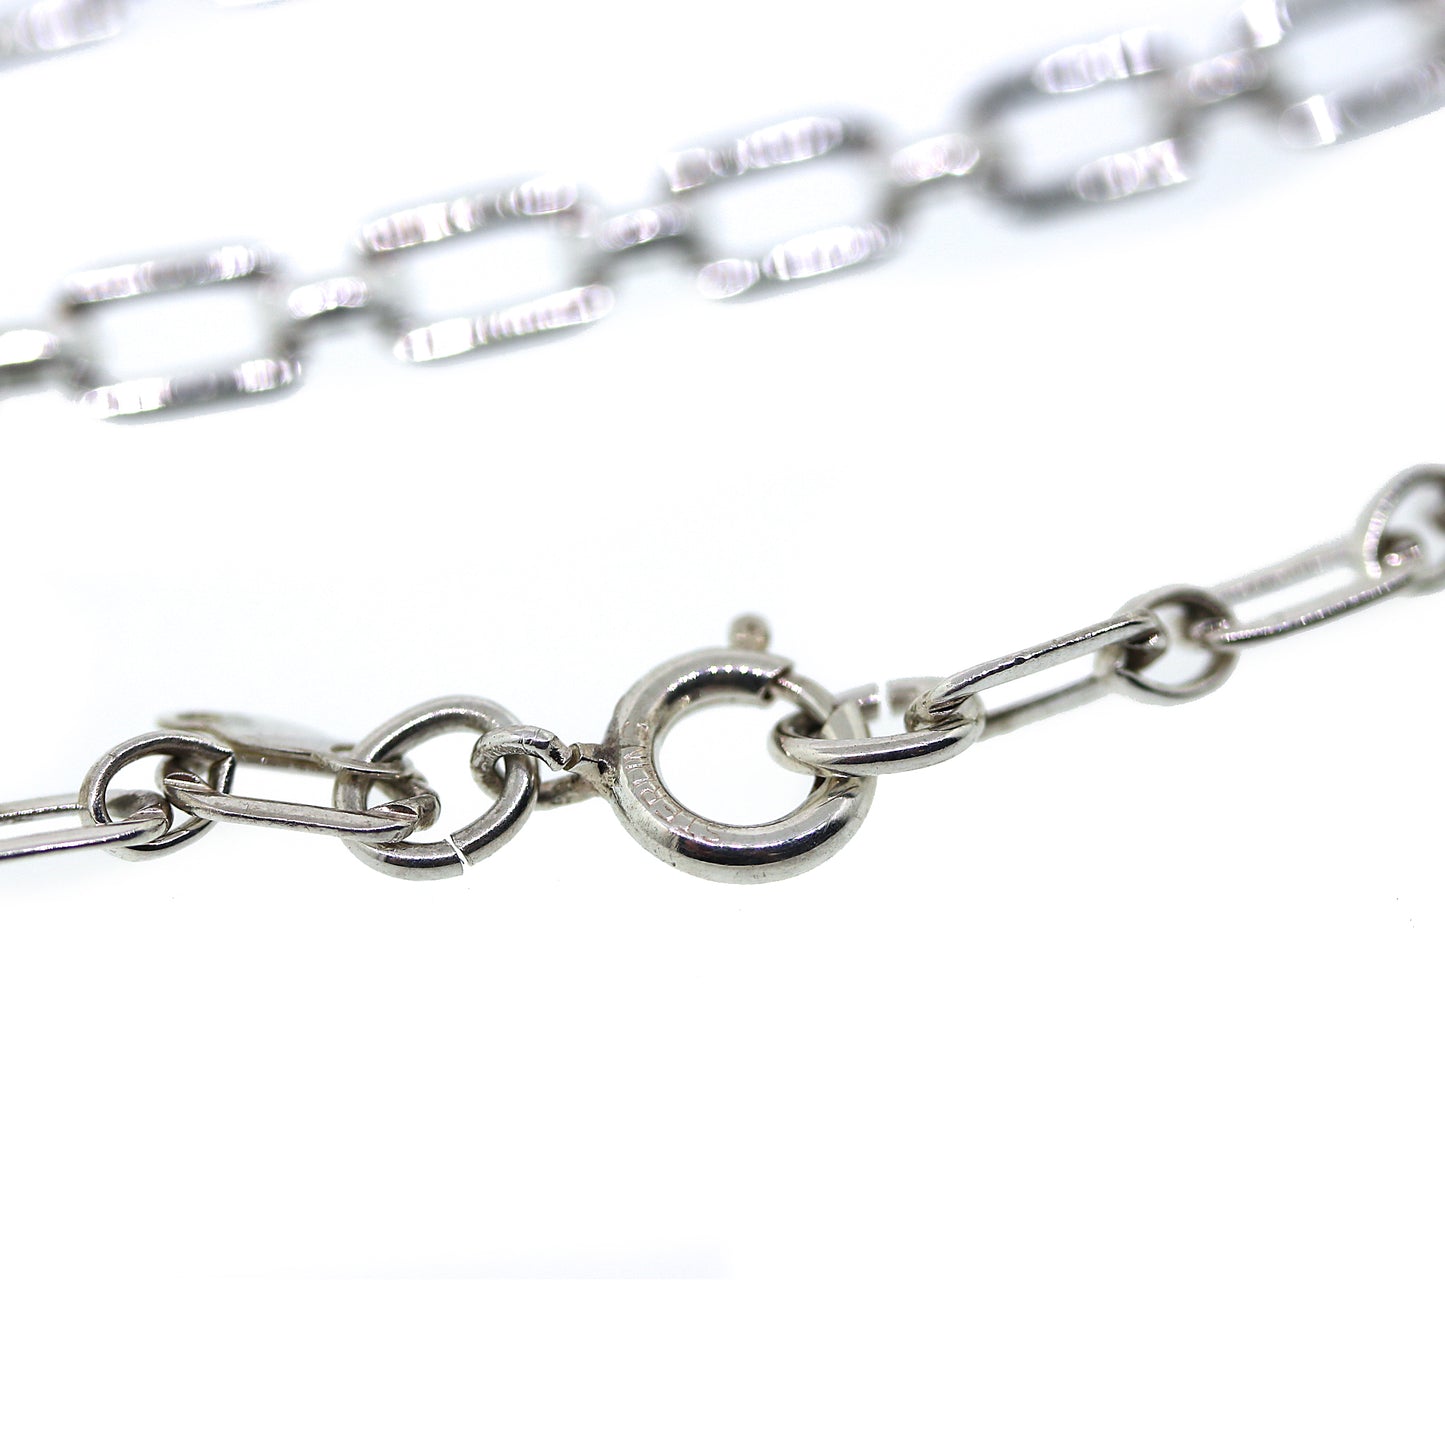 Preowned Tiffany and Co. Sterling Silver Link Chain Necklace